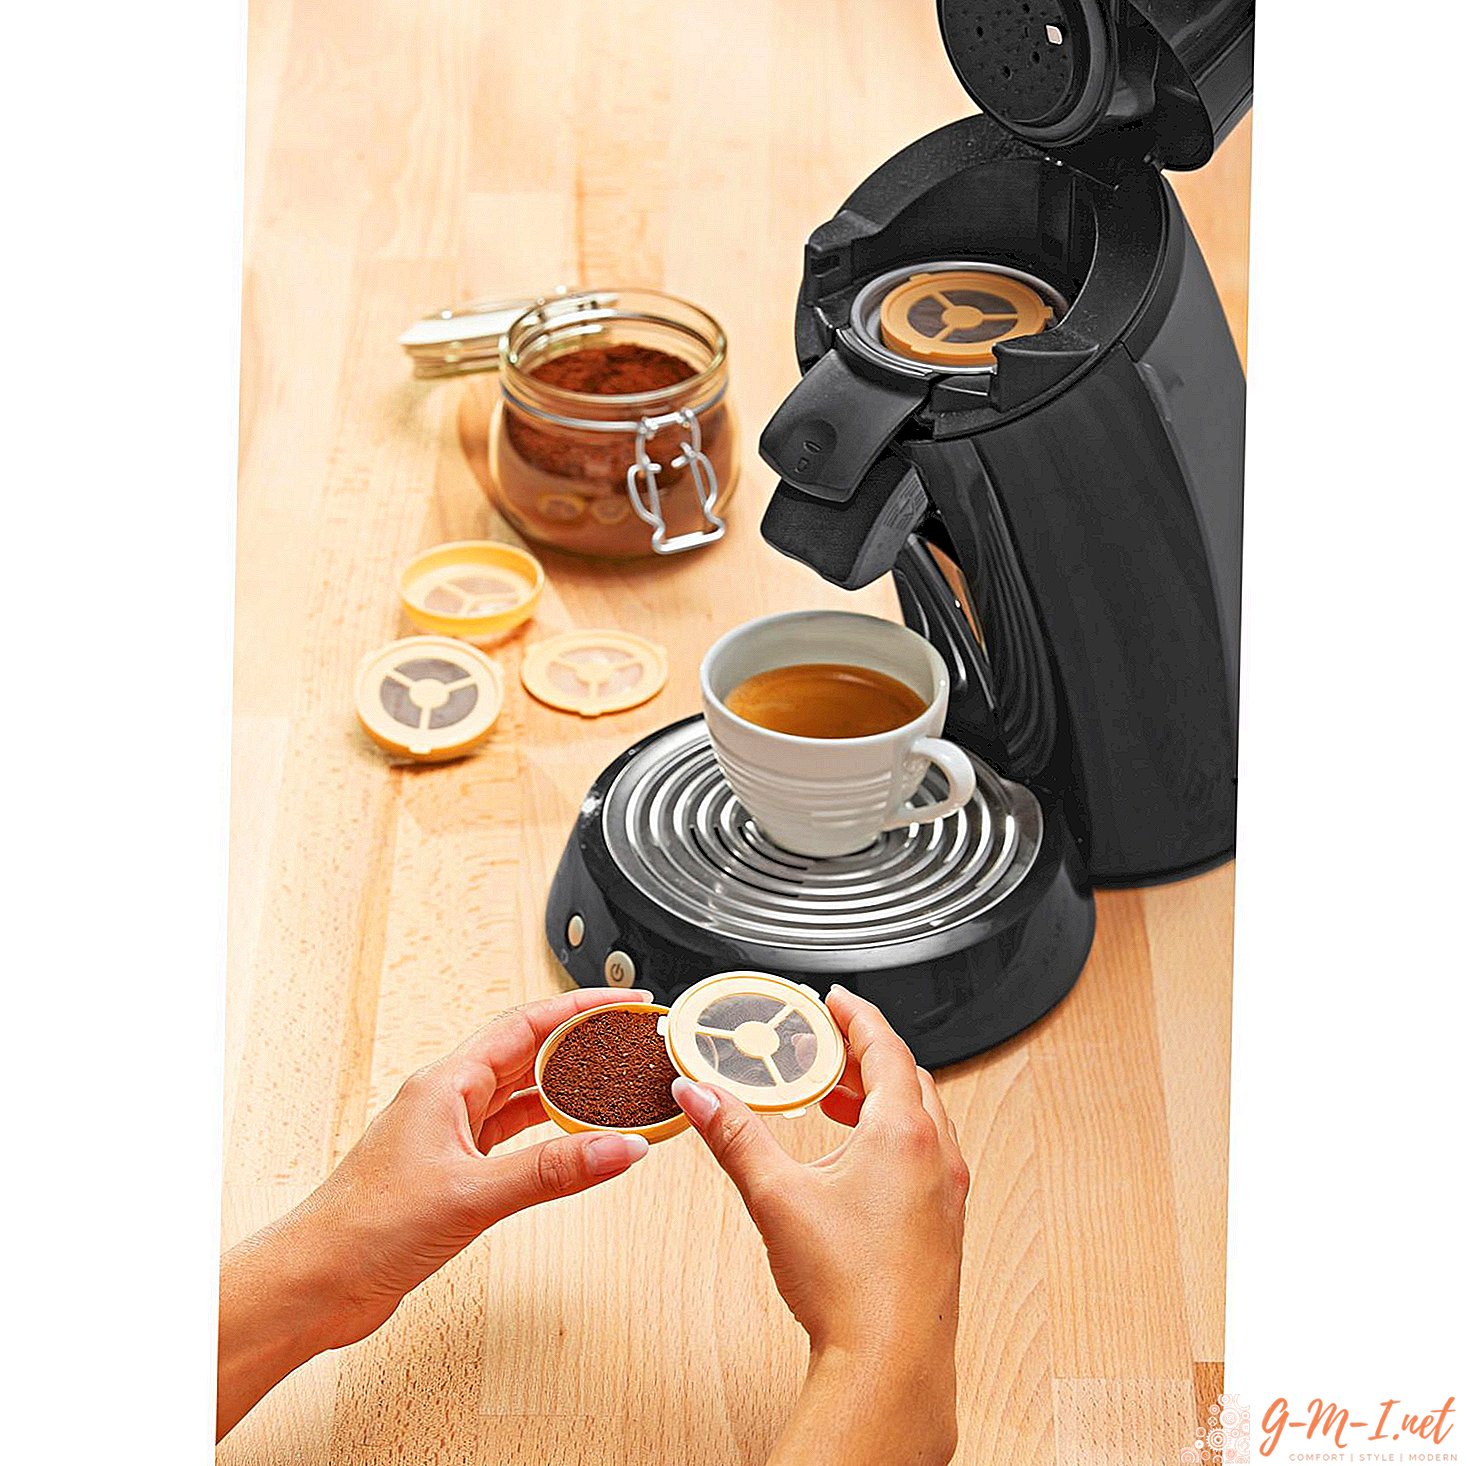 How to use a coffee maker